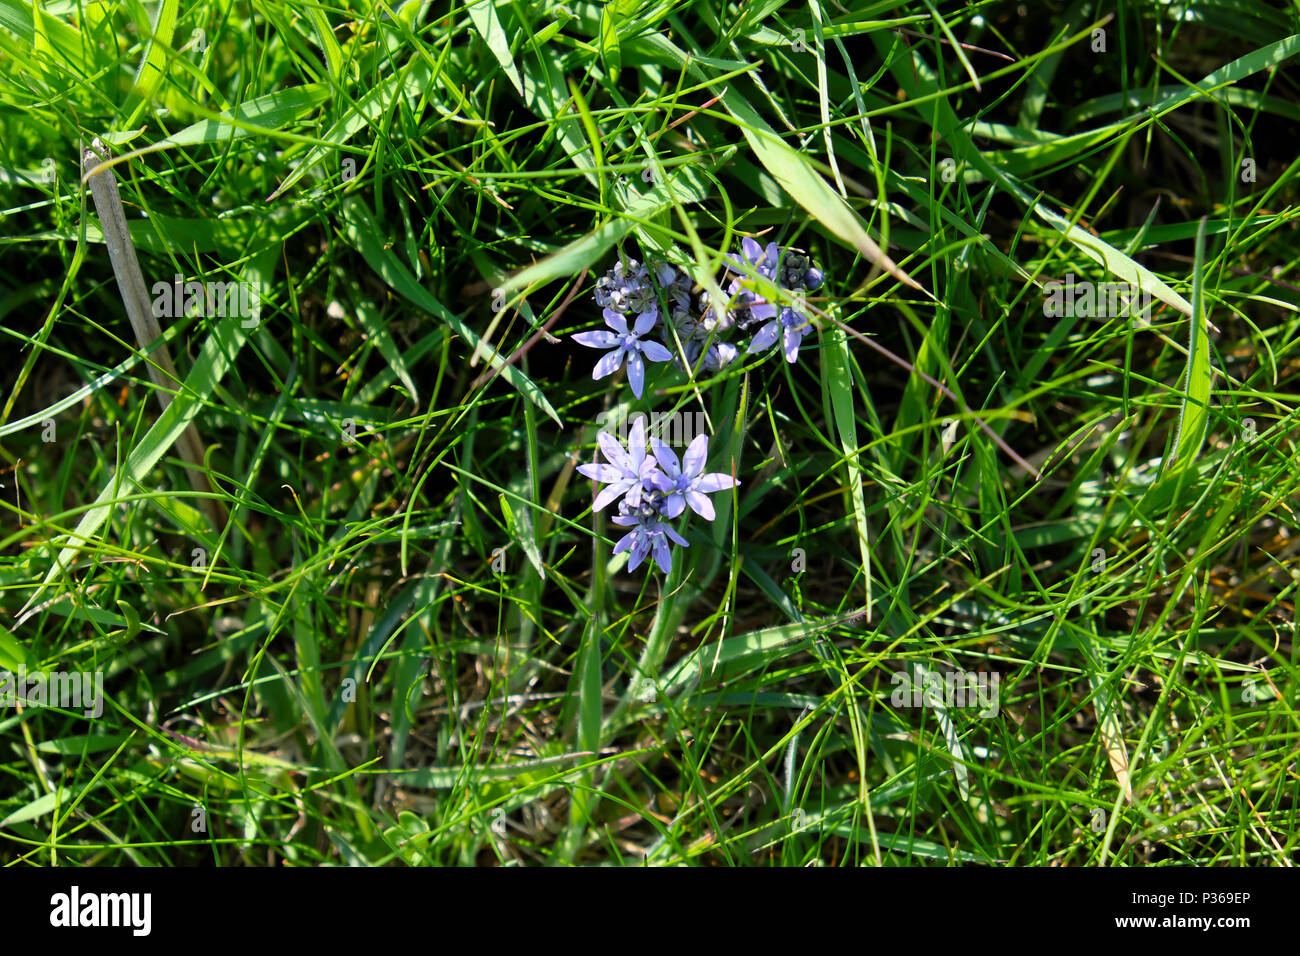 Purple spring squill wild flowers growing in grassy verge by a roadside in Pembrokeshire by Pembrokeshire Coast path in West Wales UK  KATHY DEWITT Stock Photo